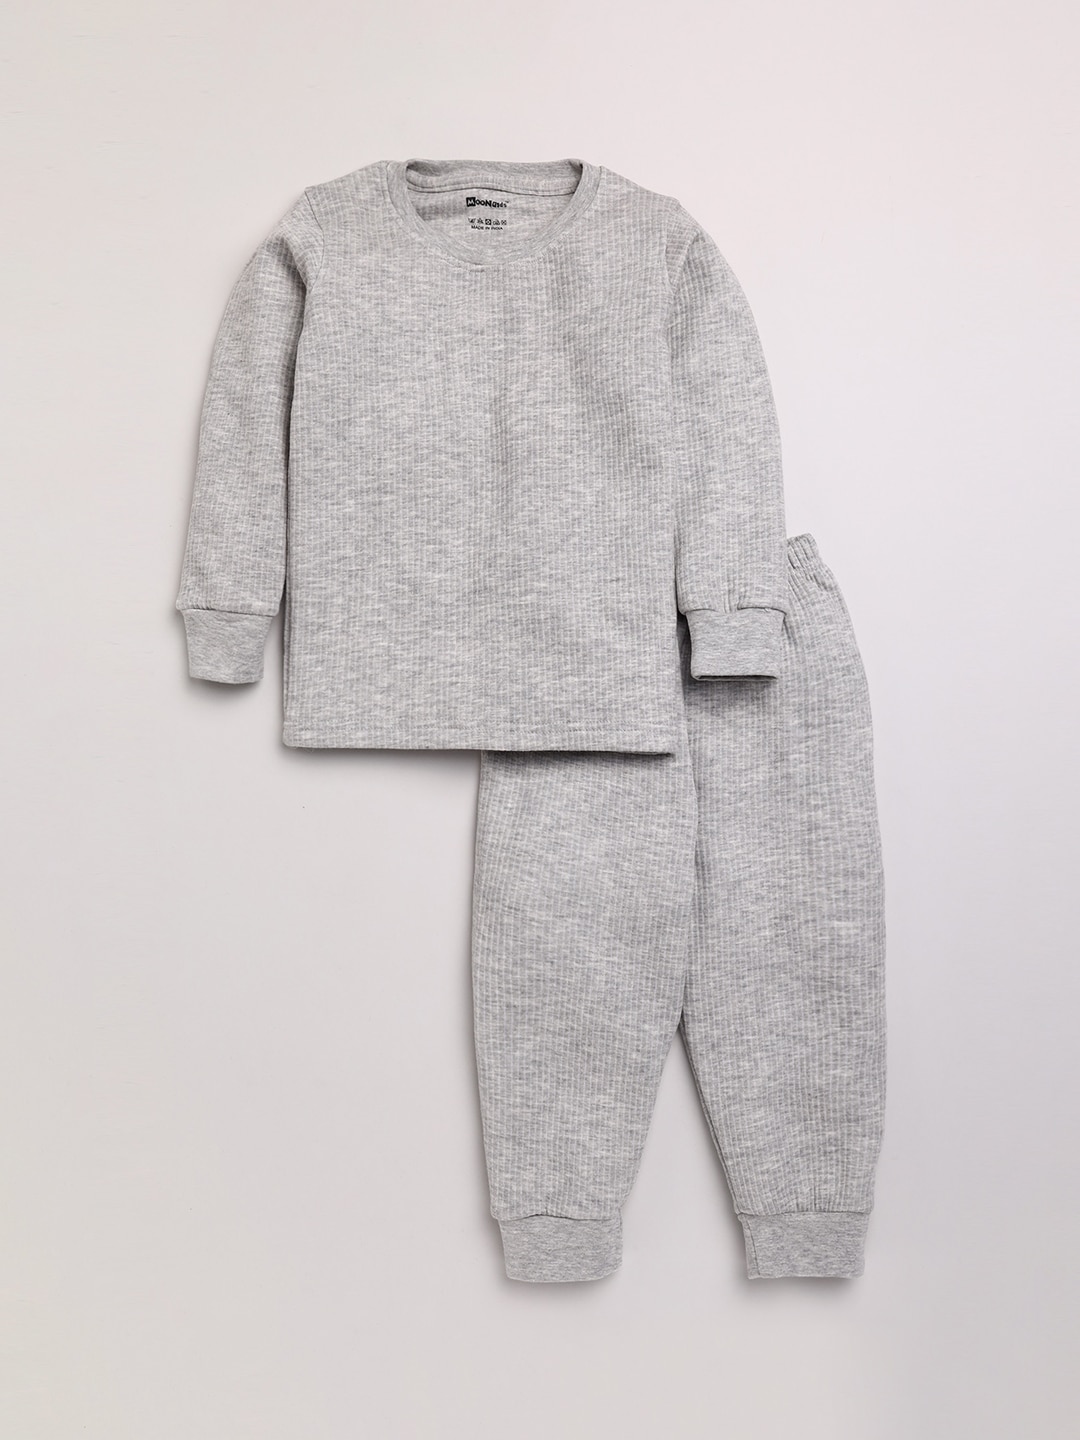 MooNKids Infant Boys Grey Solid Thermal Set